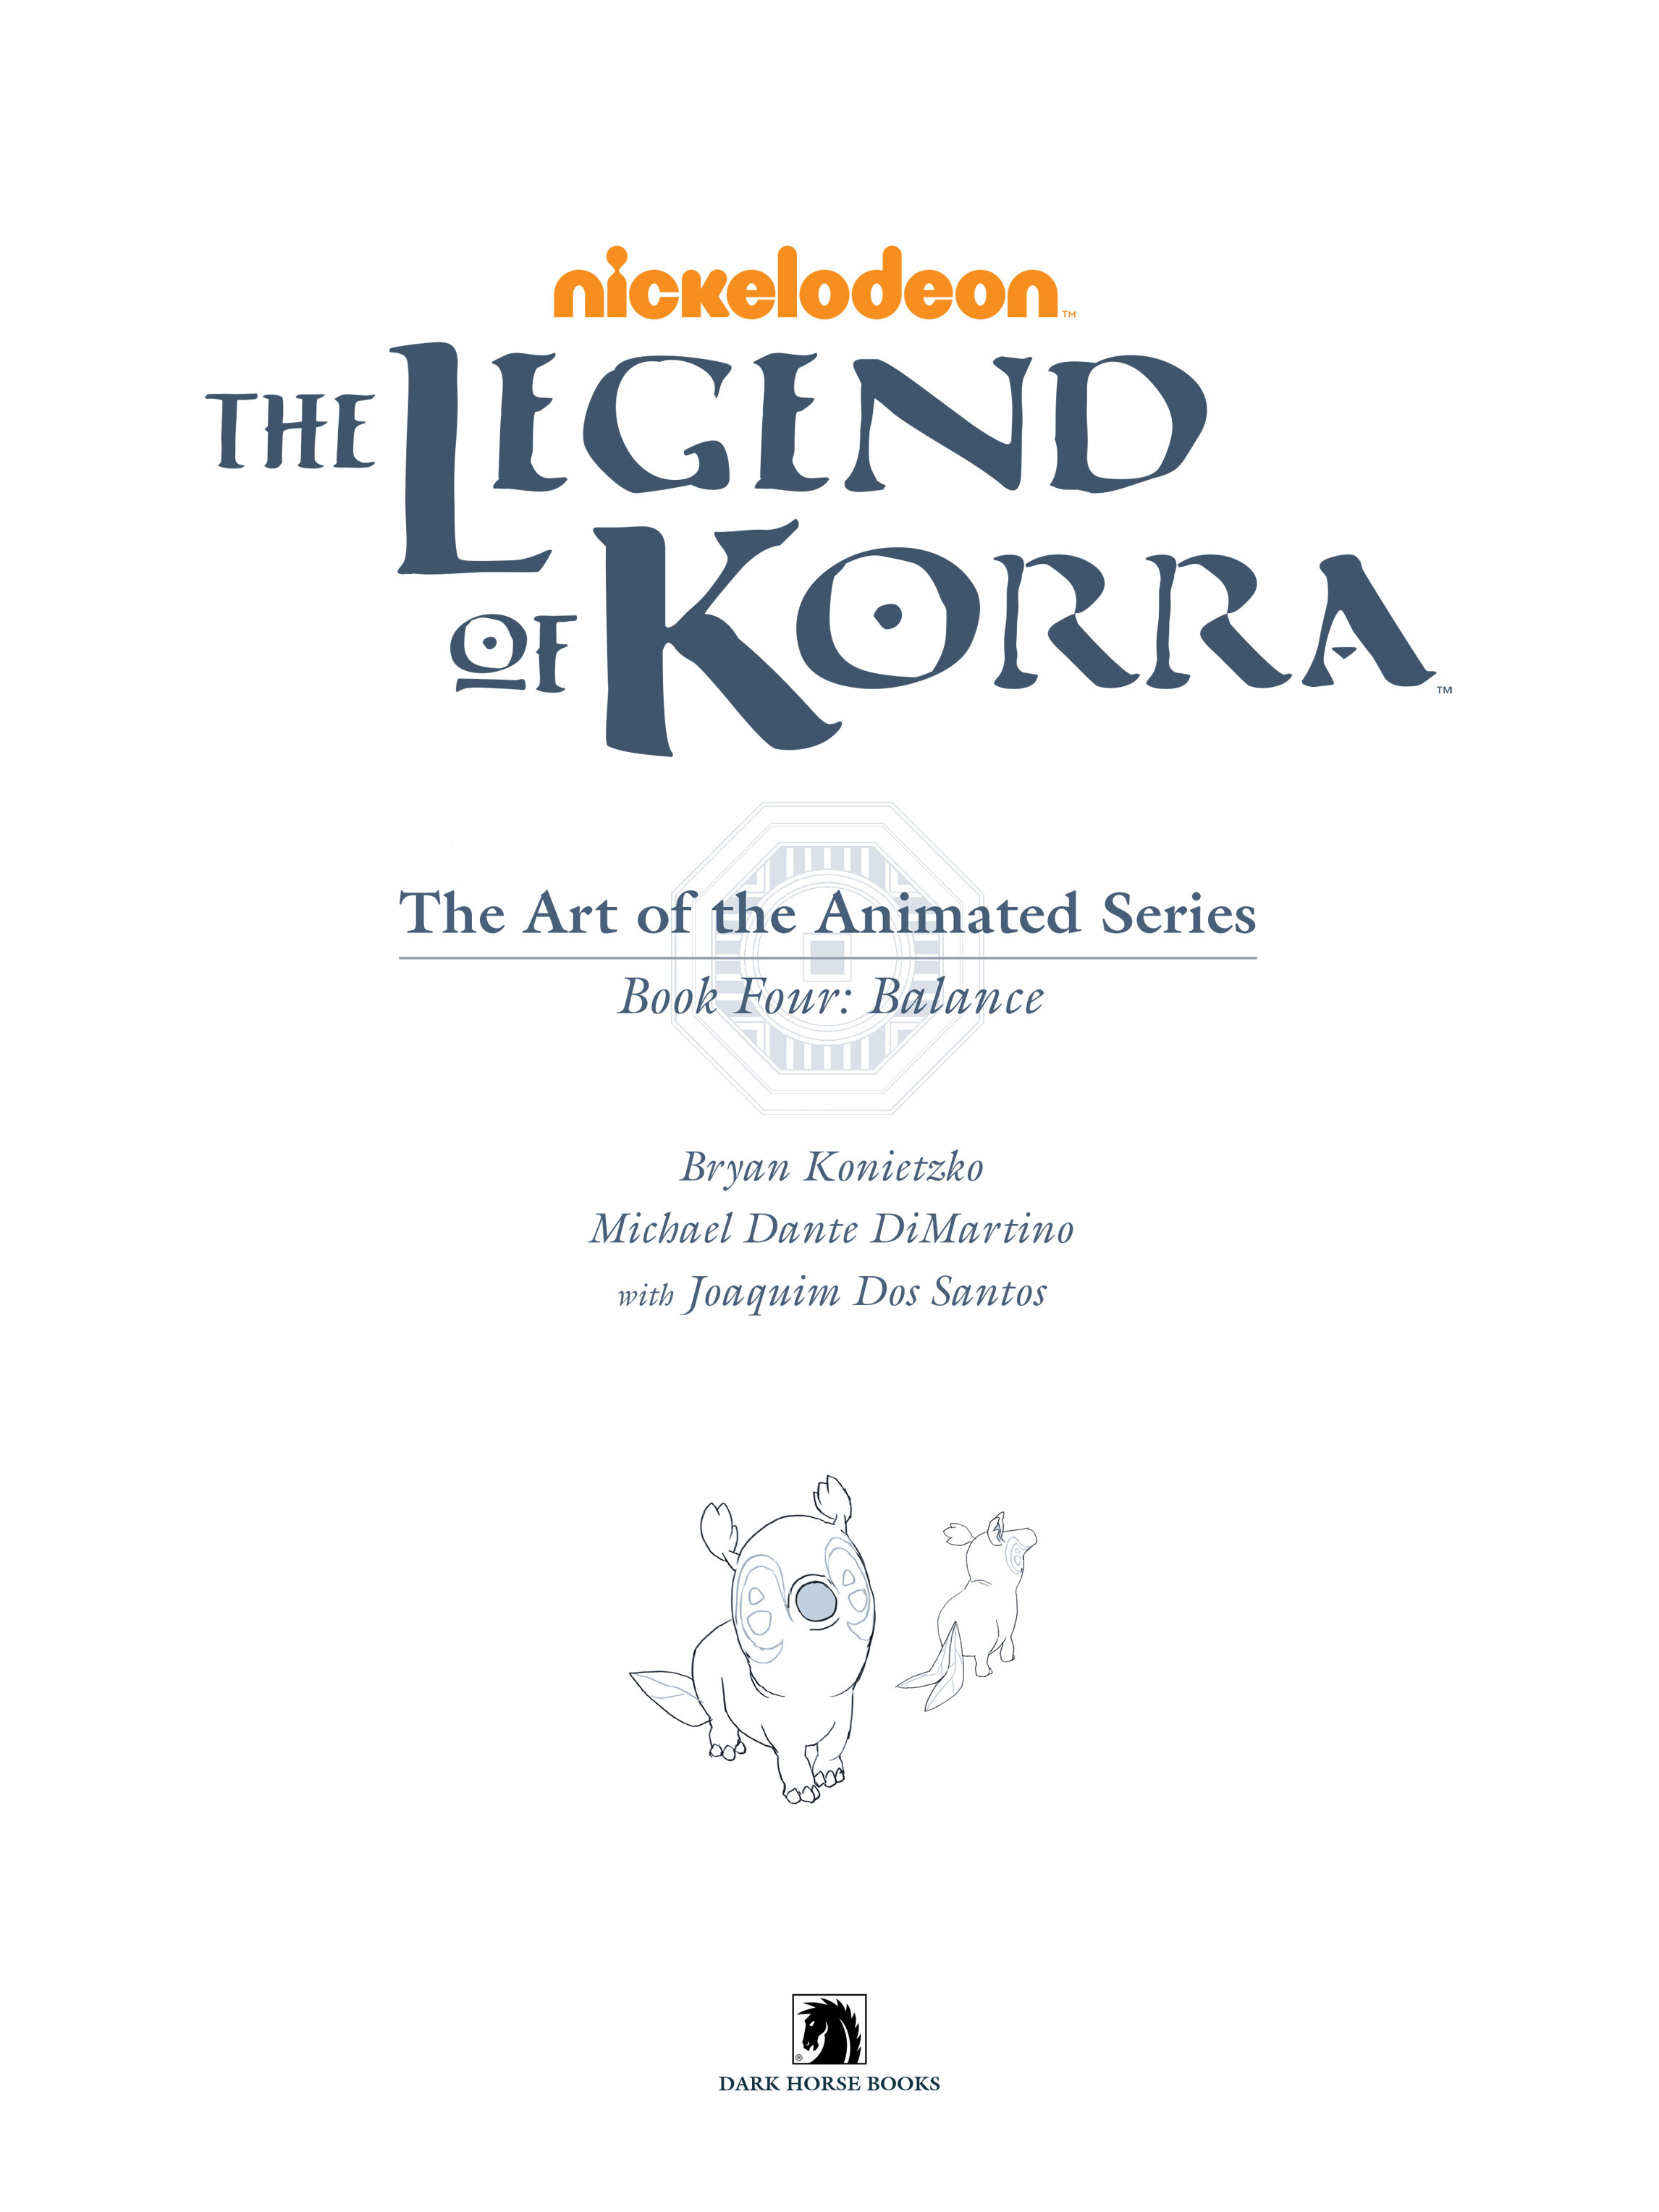 Read online The Legend of Korra: The Art of the Animated Series comic -  Issue # TPB 4 - 4